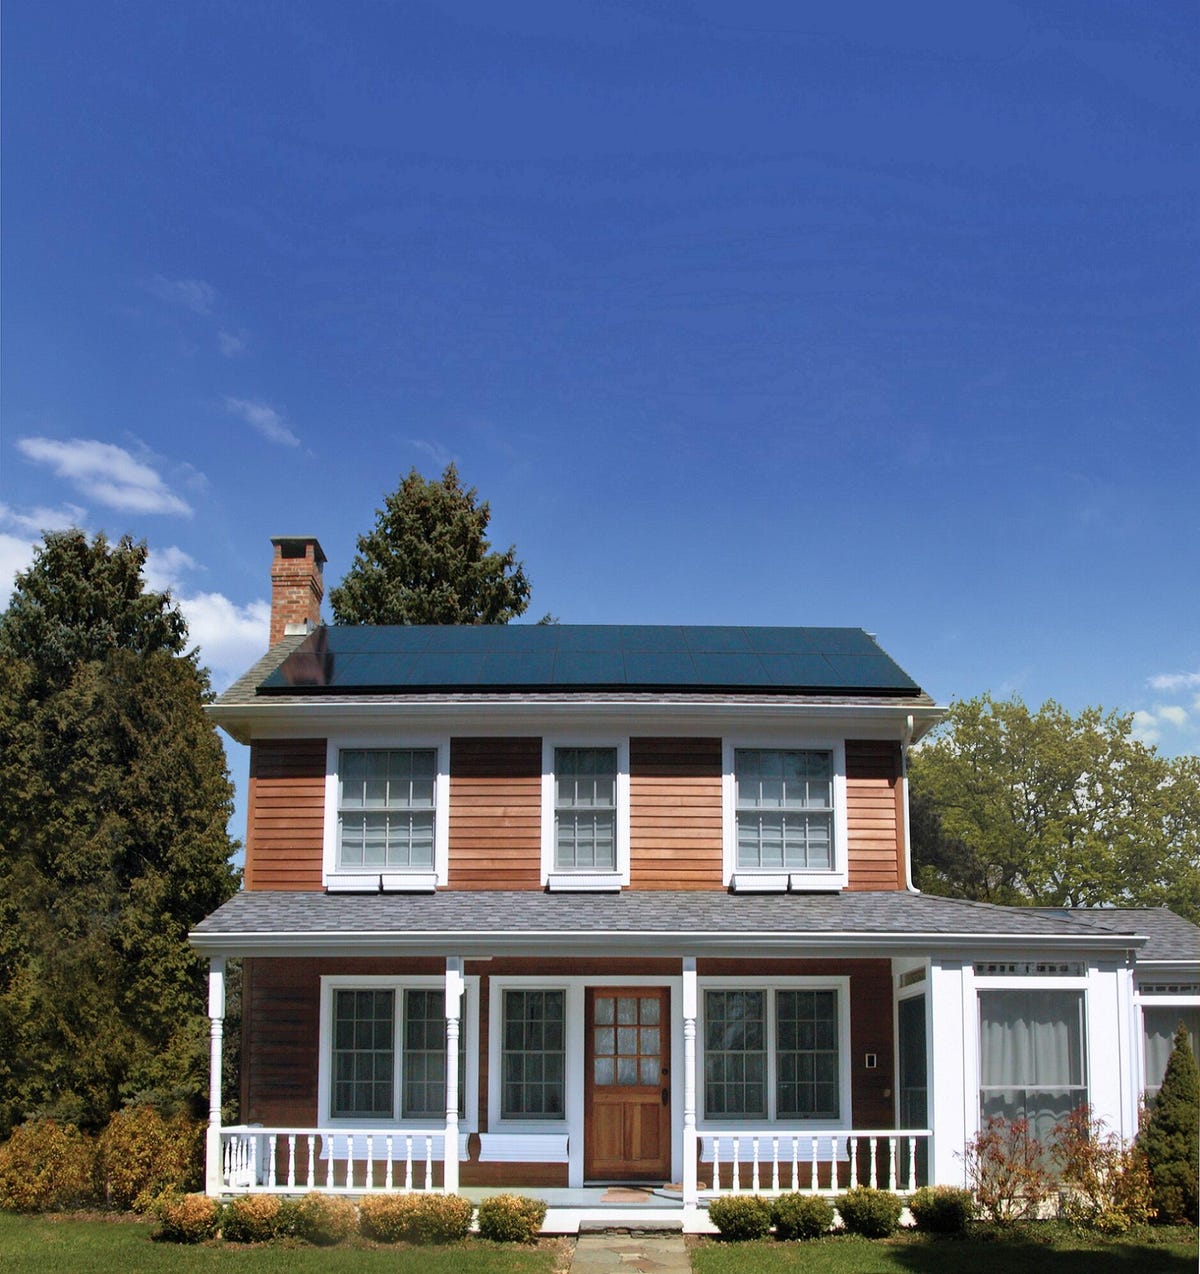 Solar panels on a two story house with a porch.